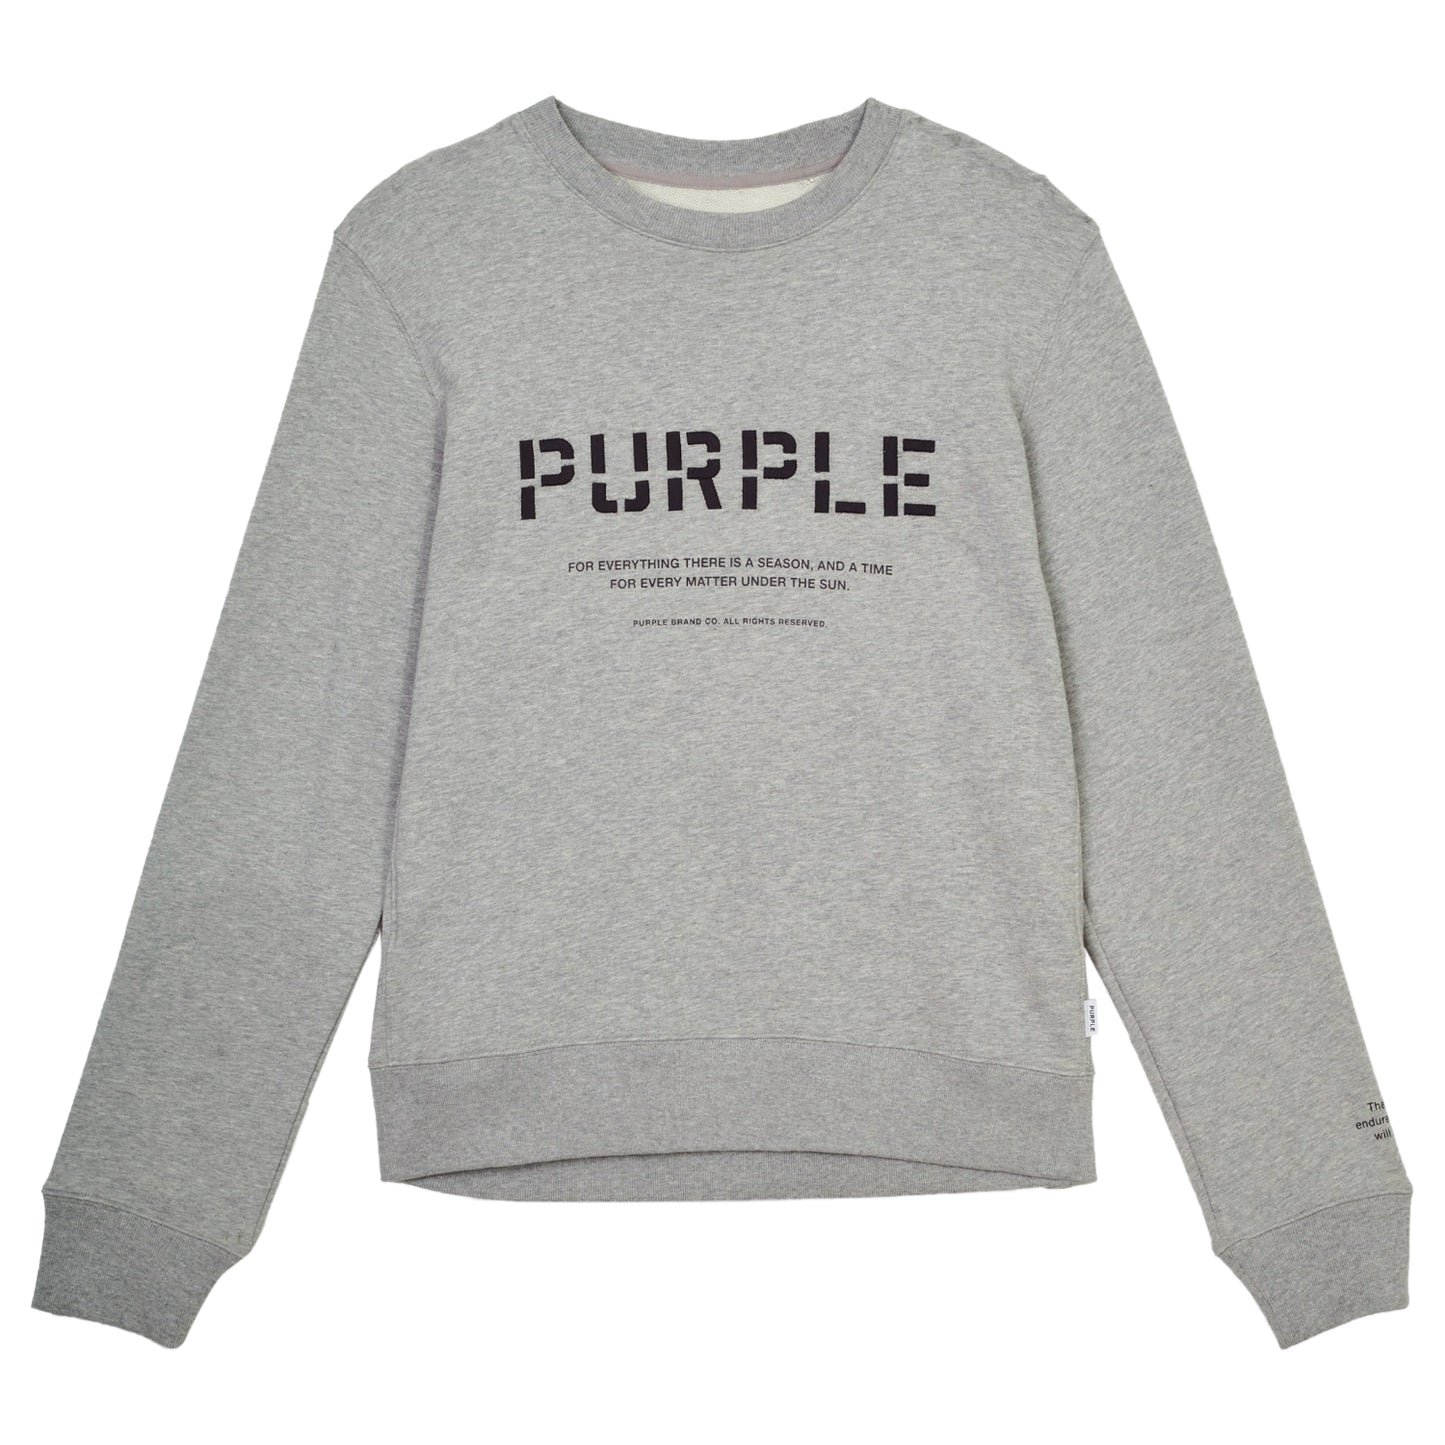 Purple-brand French Terry Embroidered Stencil Logo Crew Mens Style : P409-fhes222